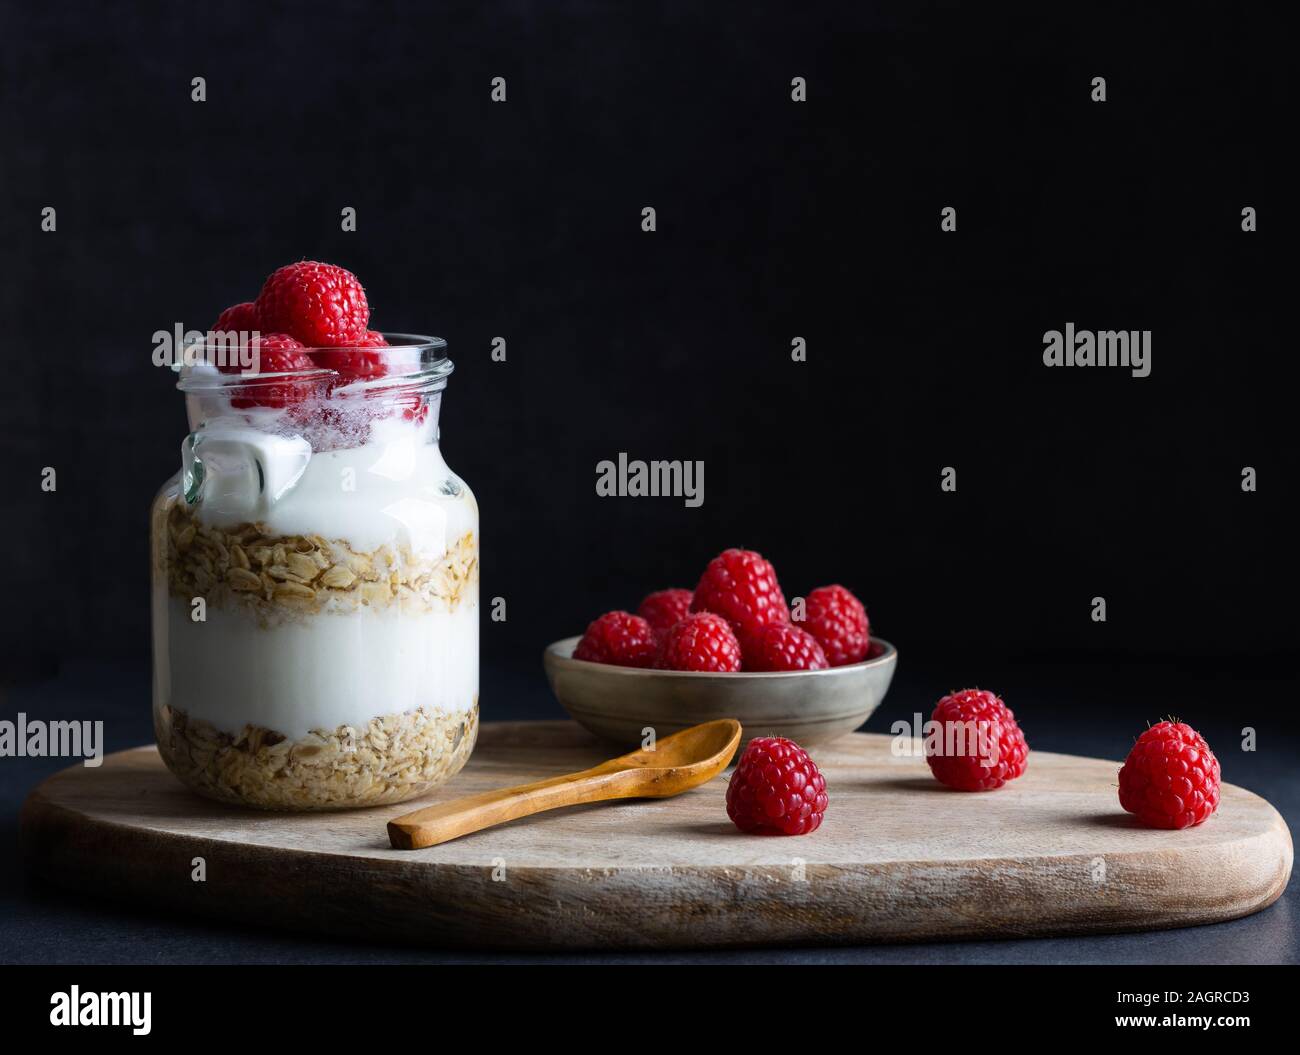 healthy vegan breakfast of yoghurt with muesli and raspberry on a dark background with copy space Stock Photo